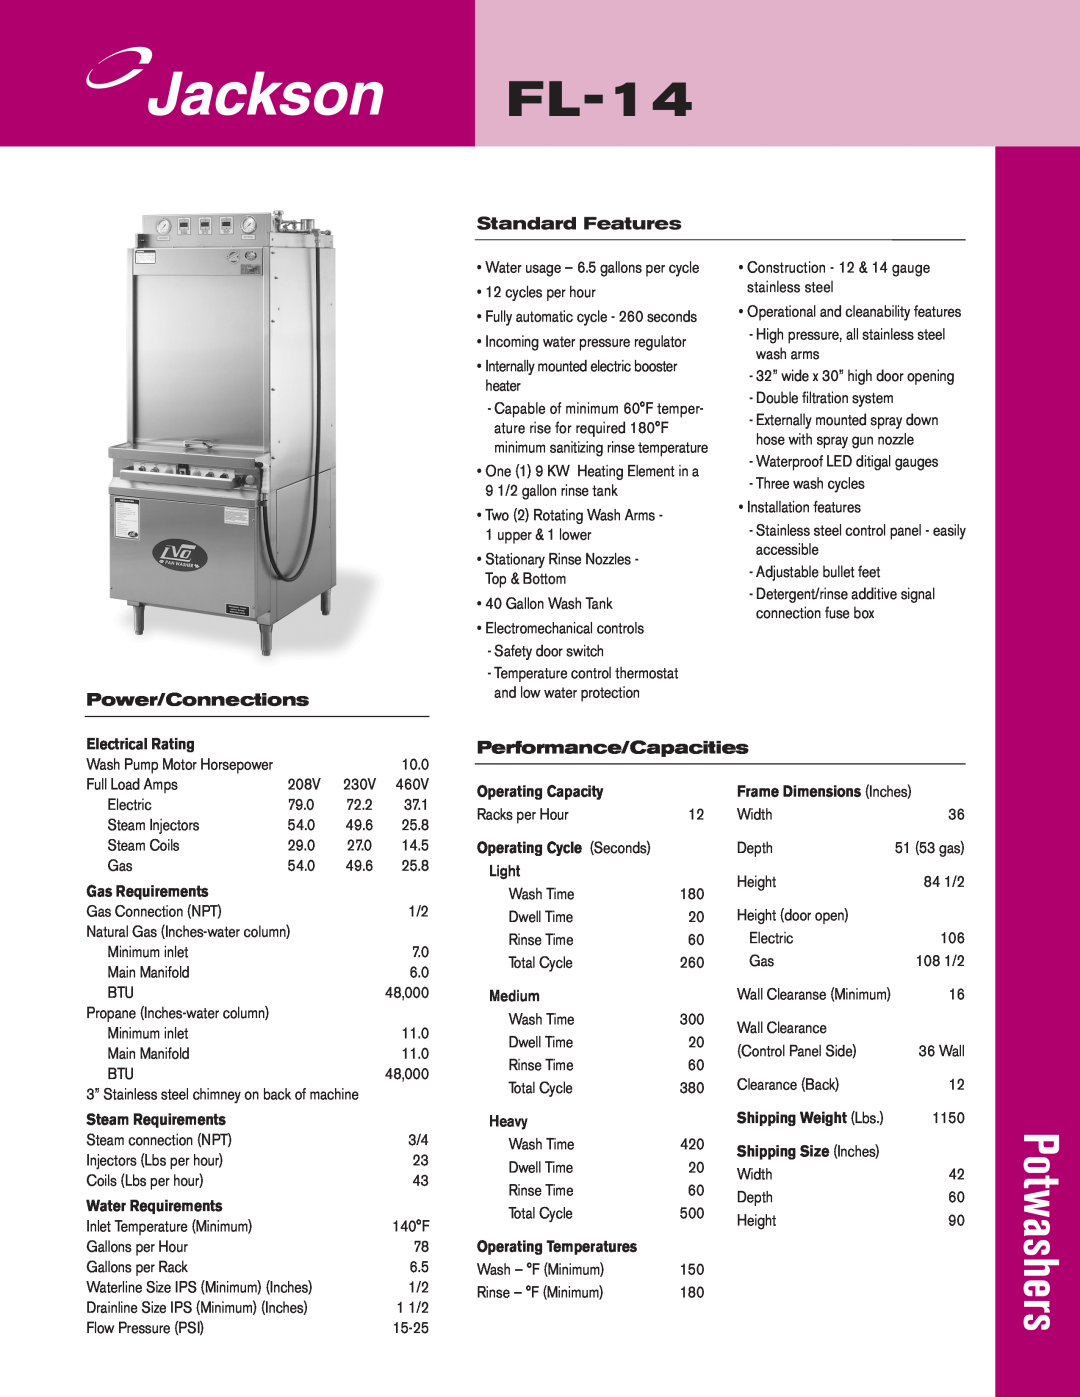 Jackson FL-14 dimensions Standard Features, Power/Connections, Performance/Capacities, Electrical Rating, Gas Requirements 